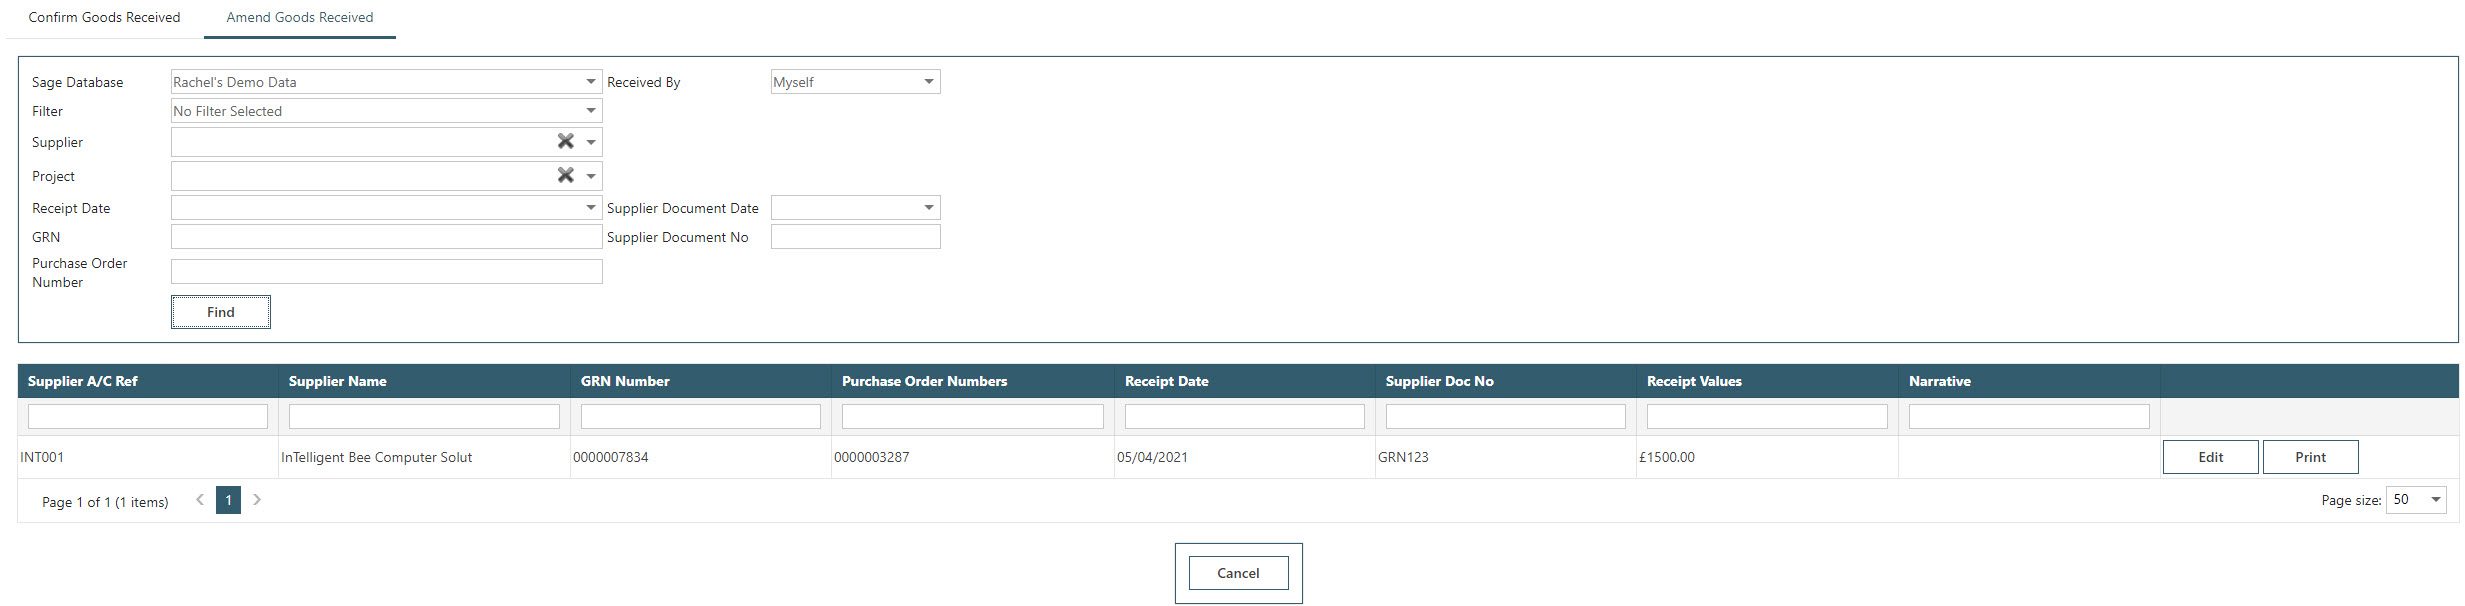 Sicon WAP Purchase Requisitions Help and User Guide - Requisition HUG Section 10.3 Image 1